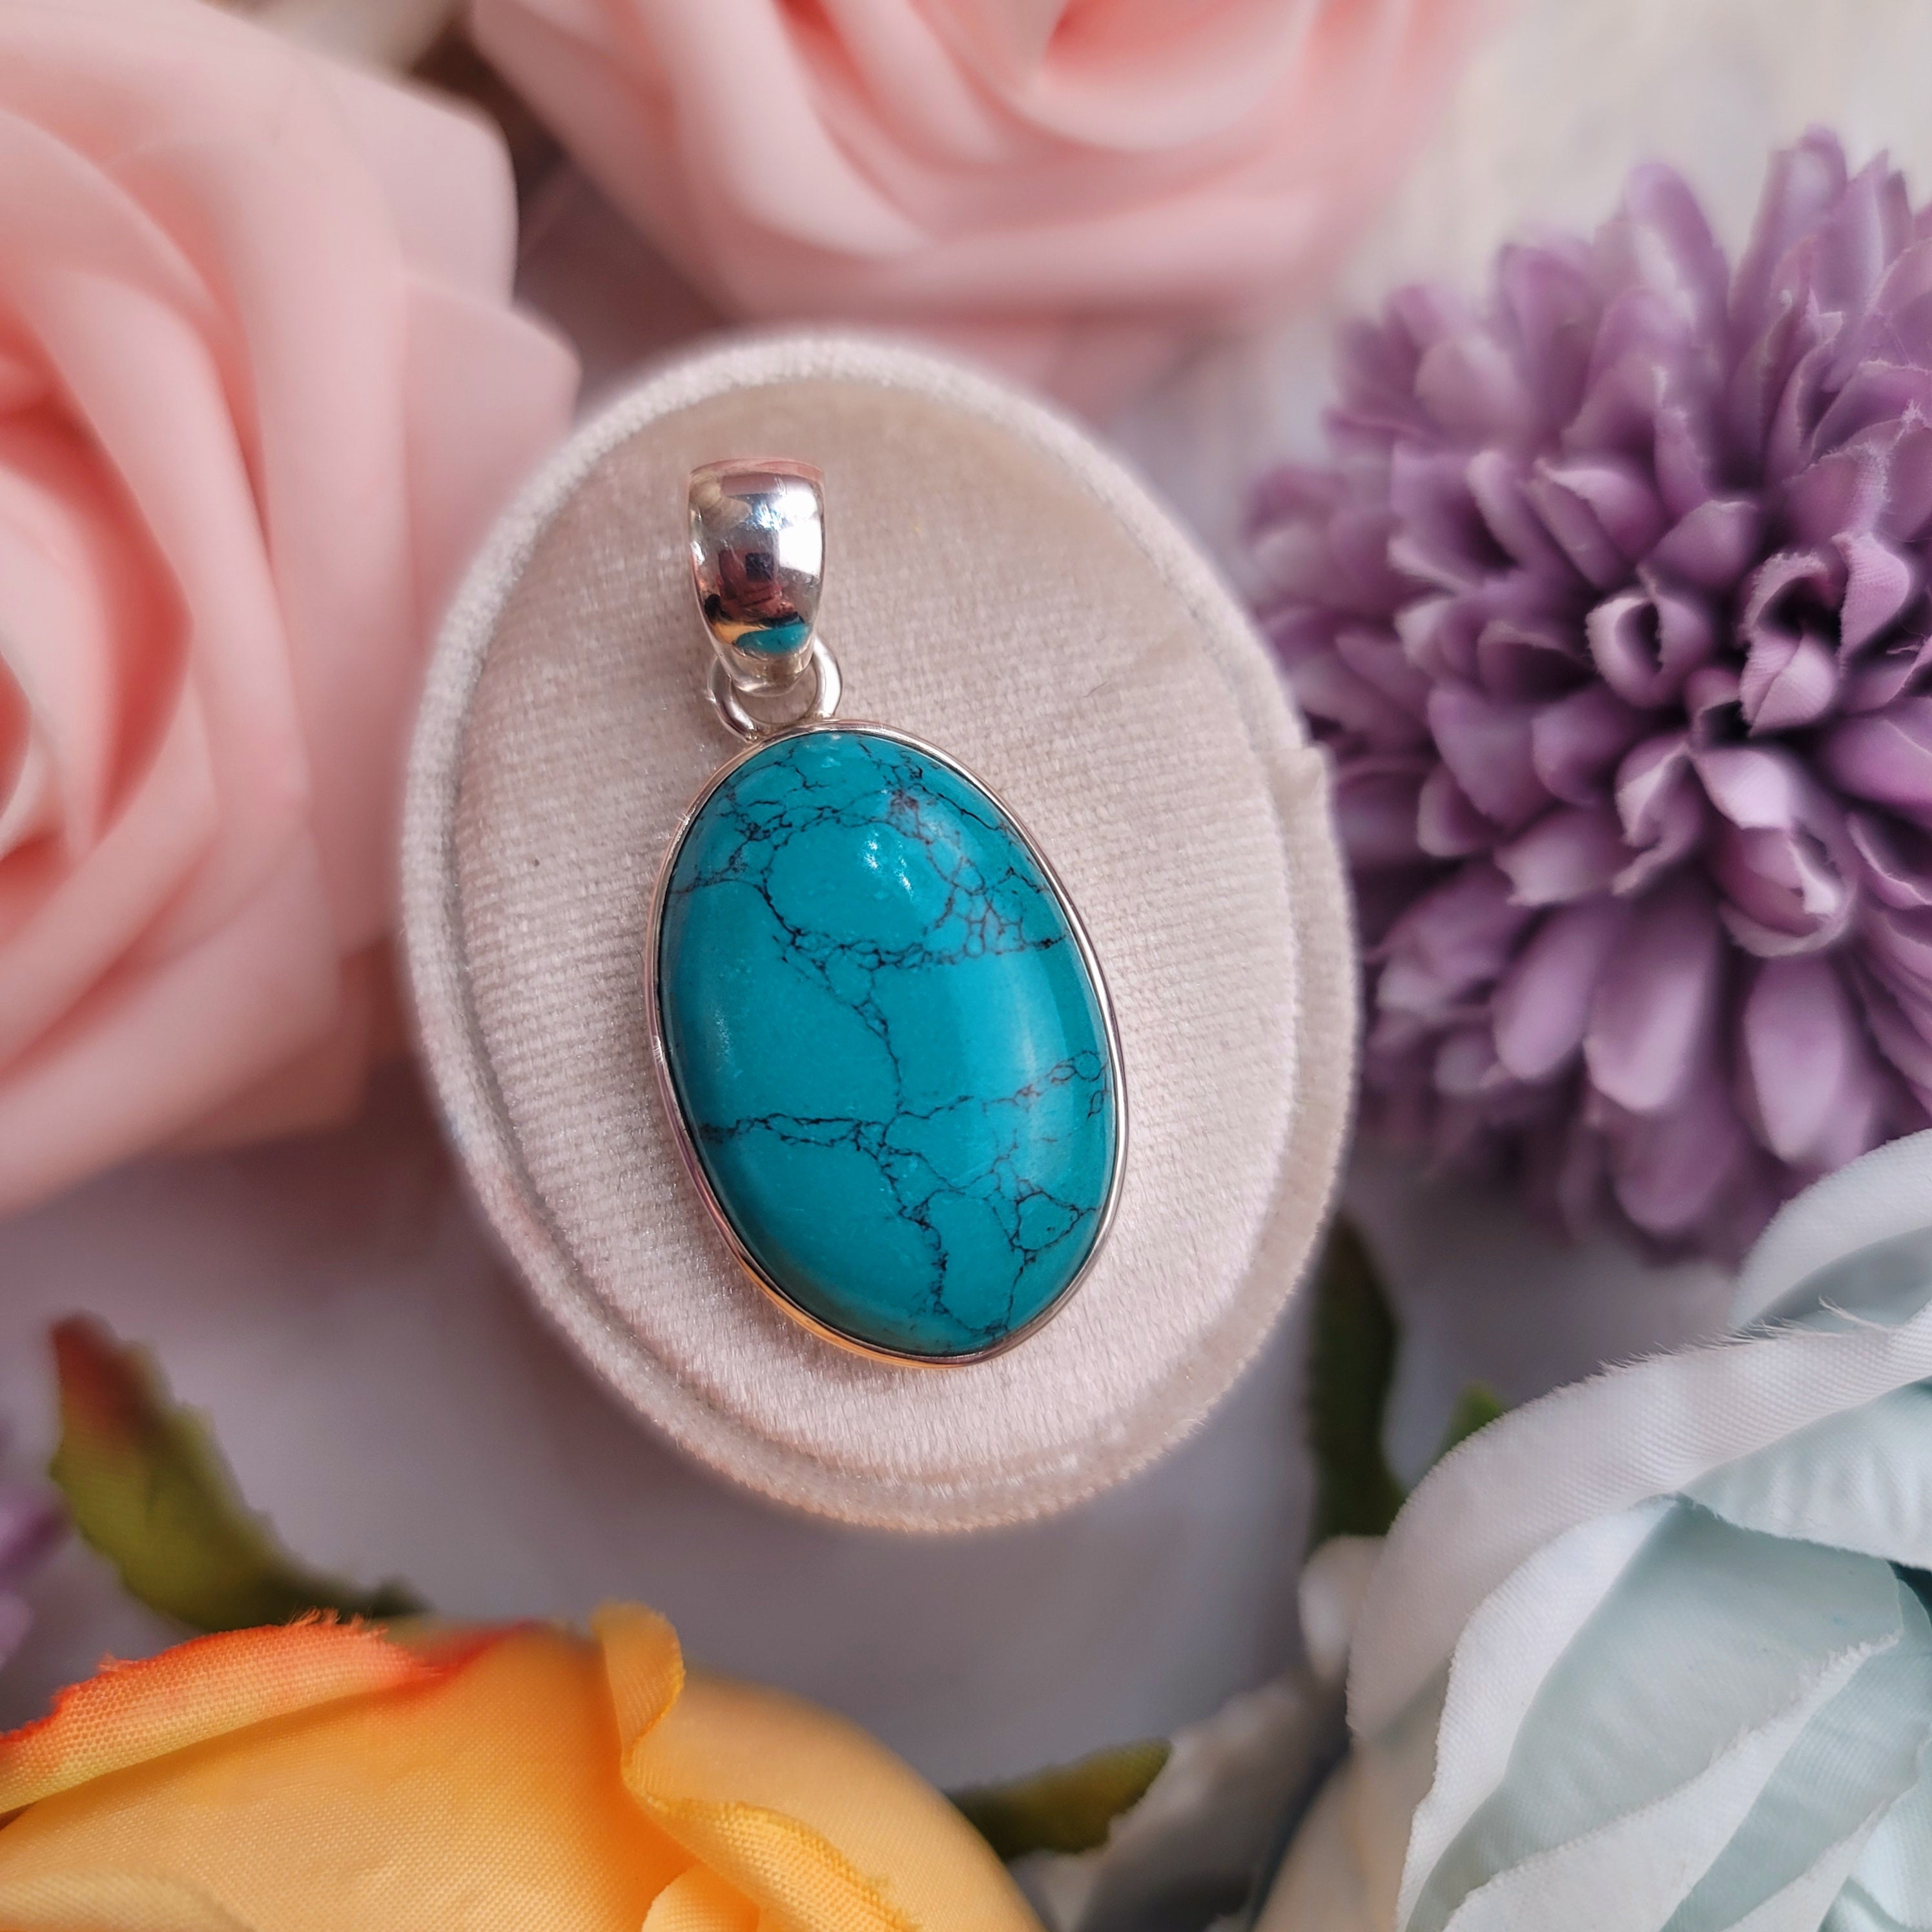 Tibetan Turquoise Pendant for Good Luck, Love, Prosperity and Protection